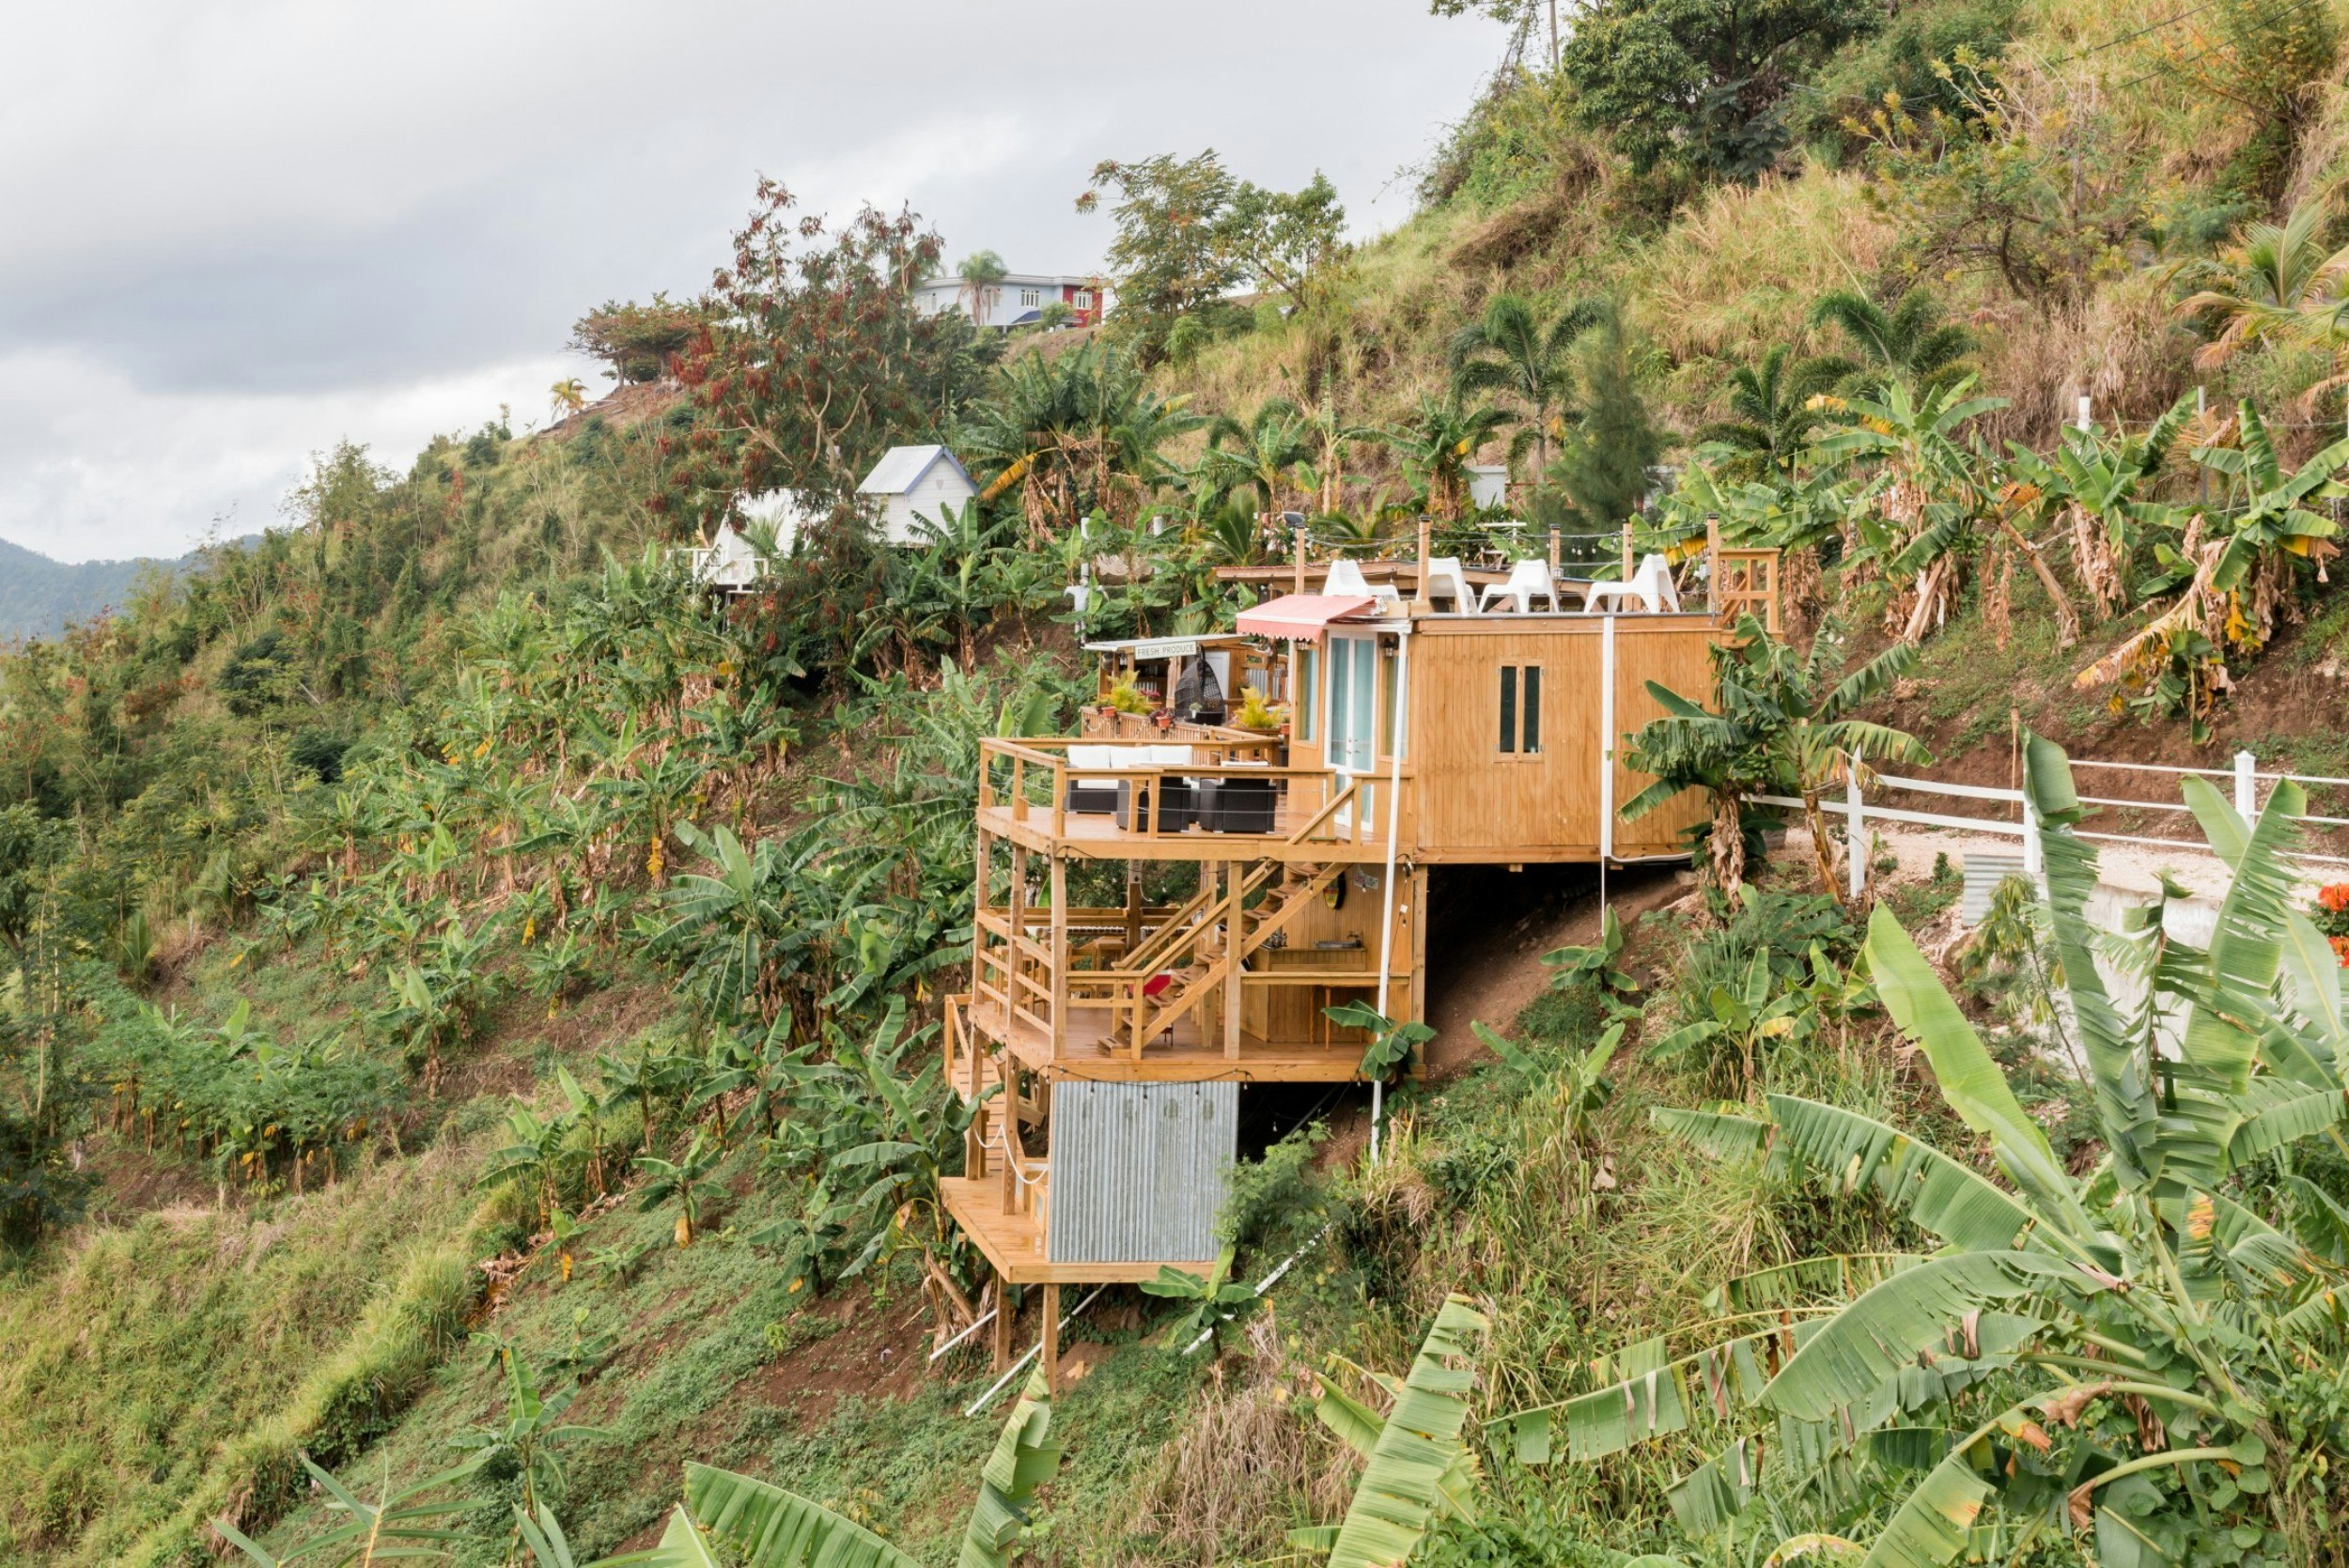 A tiny house on the side of a mountain in Puerto Rico